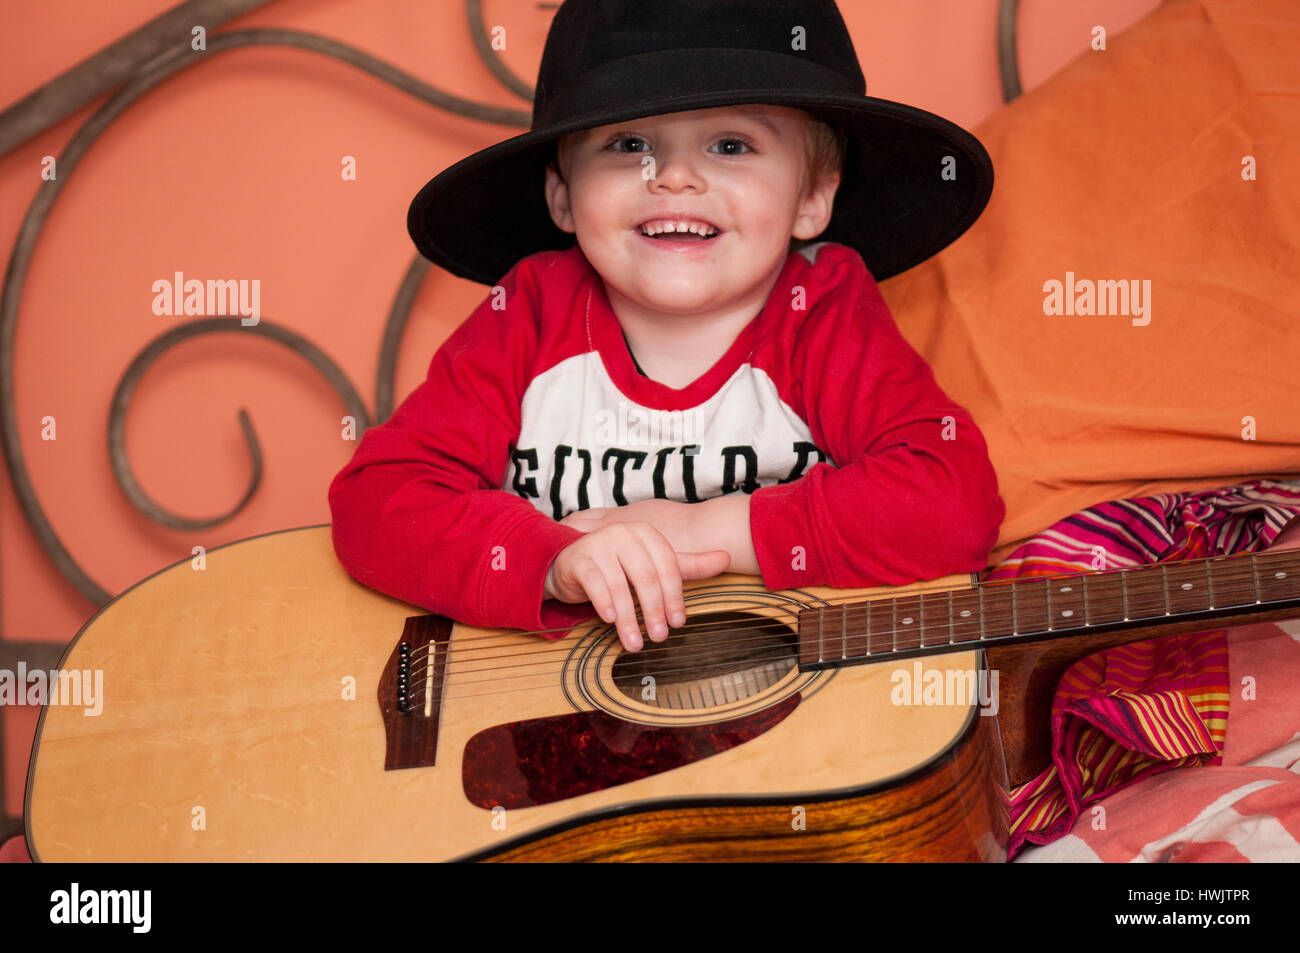 2-3 YEAR OLD CAUCASIAN MALE WITH HAT ON HODING A GUITAR. Stock Photo